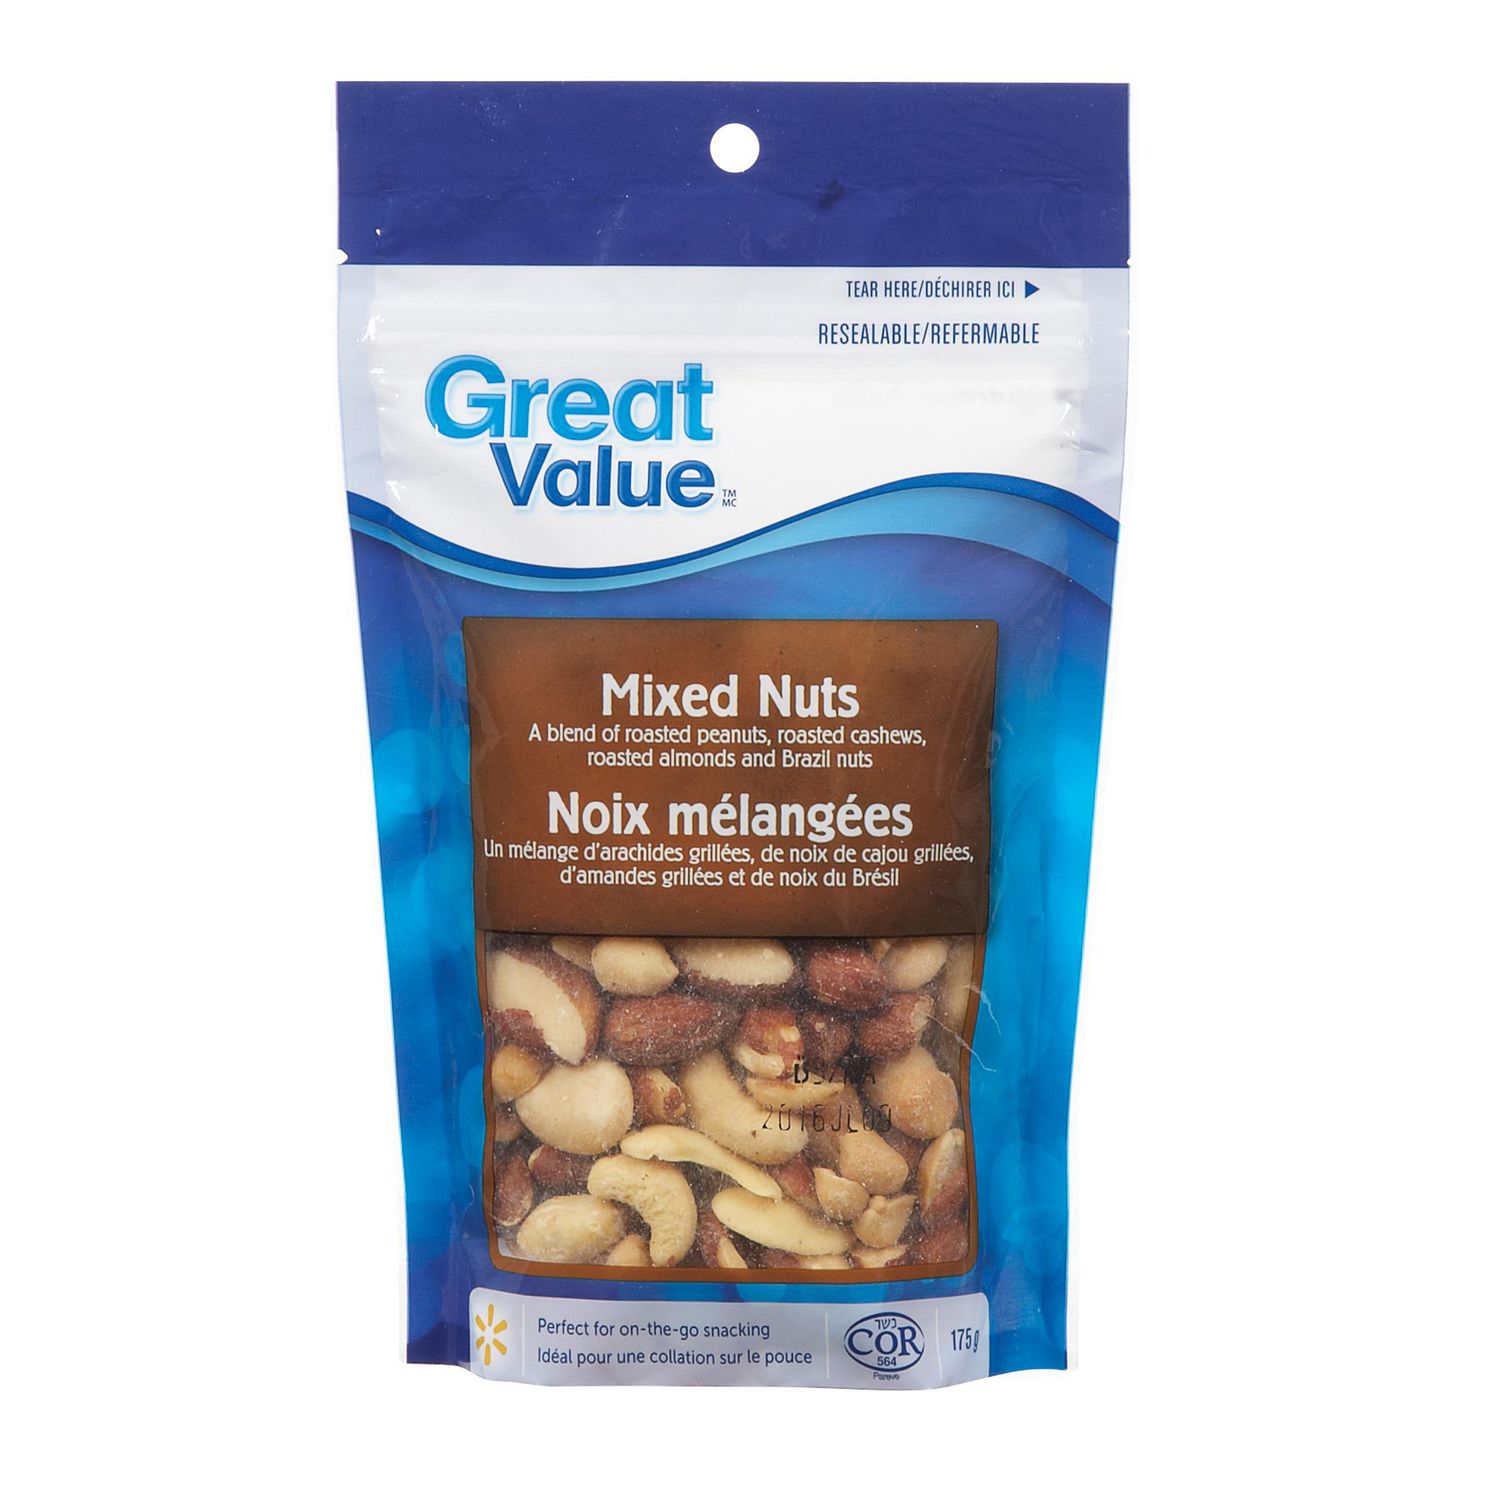 Great Value Deluxe Mixed Nuts, 1.13 kg